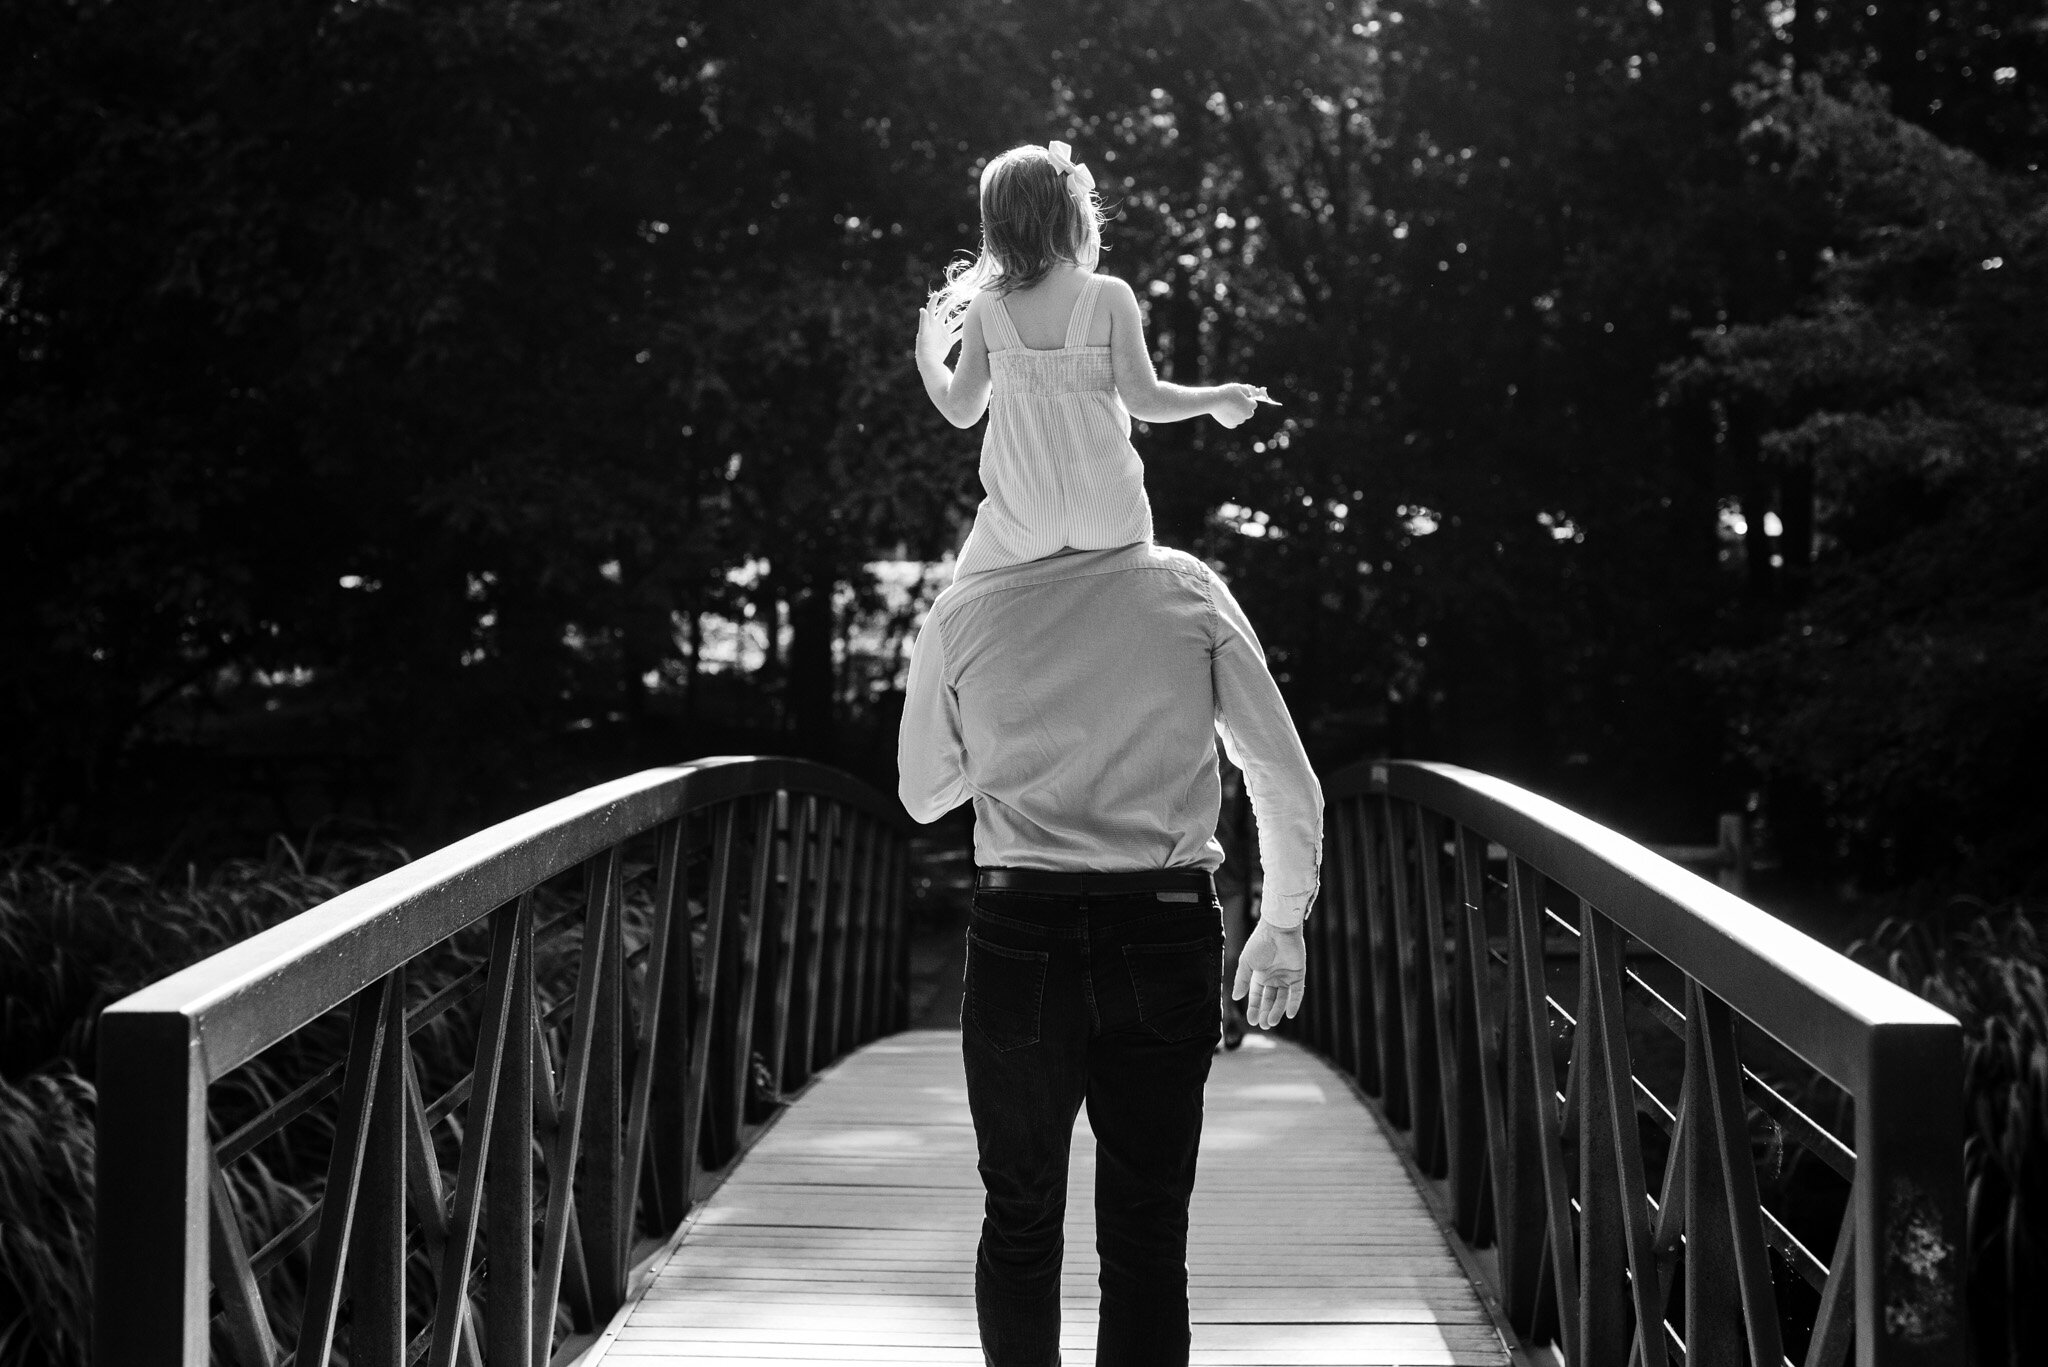 Daughter riding on her father's shoulders.